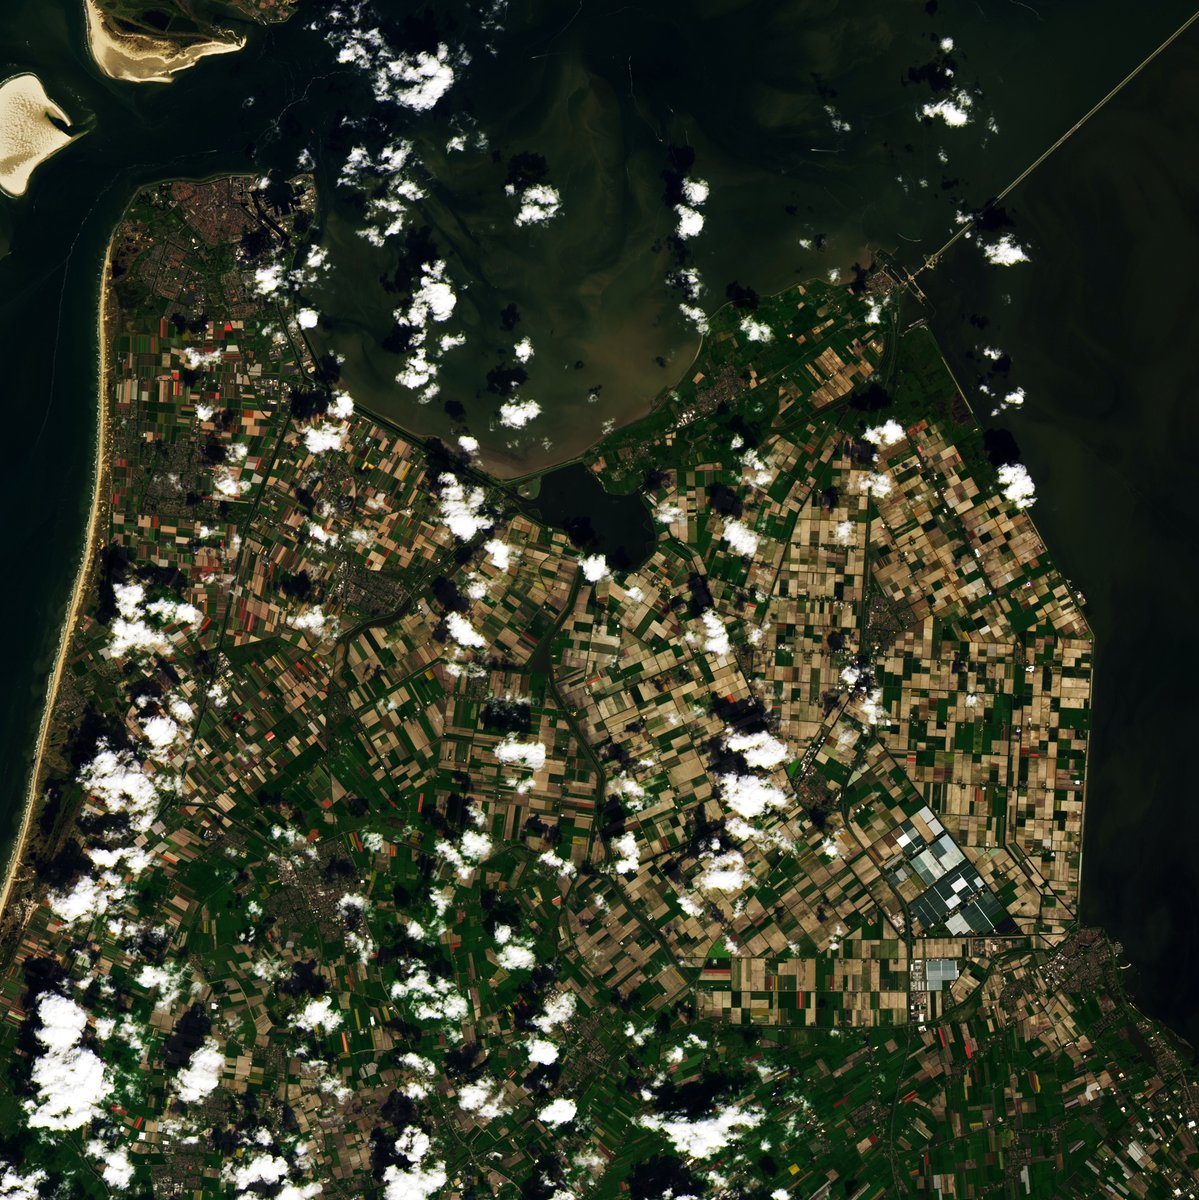 The Netherlands grows so may tulips you can see them from space. Zoom in for the red ones. 
earthobservatory.nasa.gov/images/152750/…